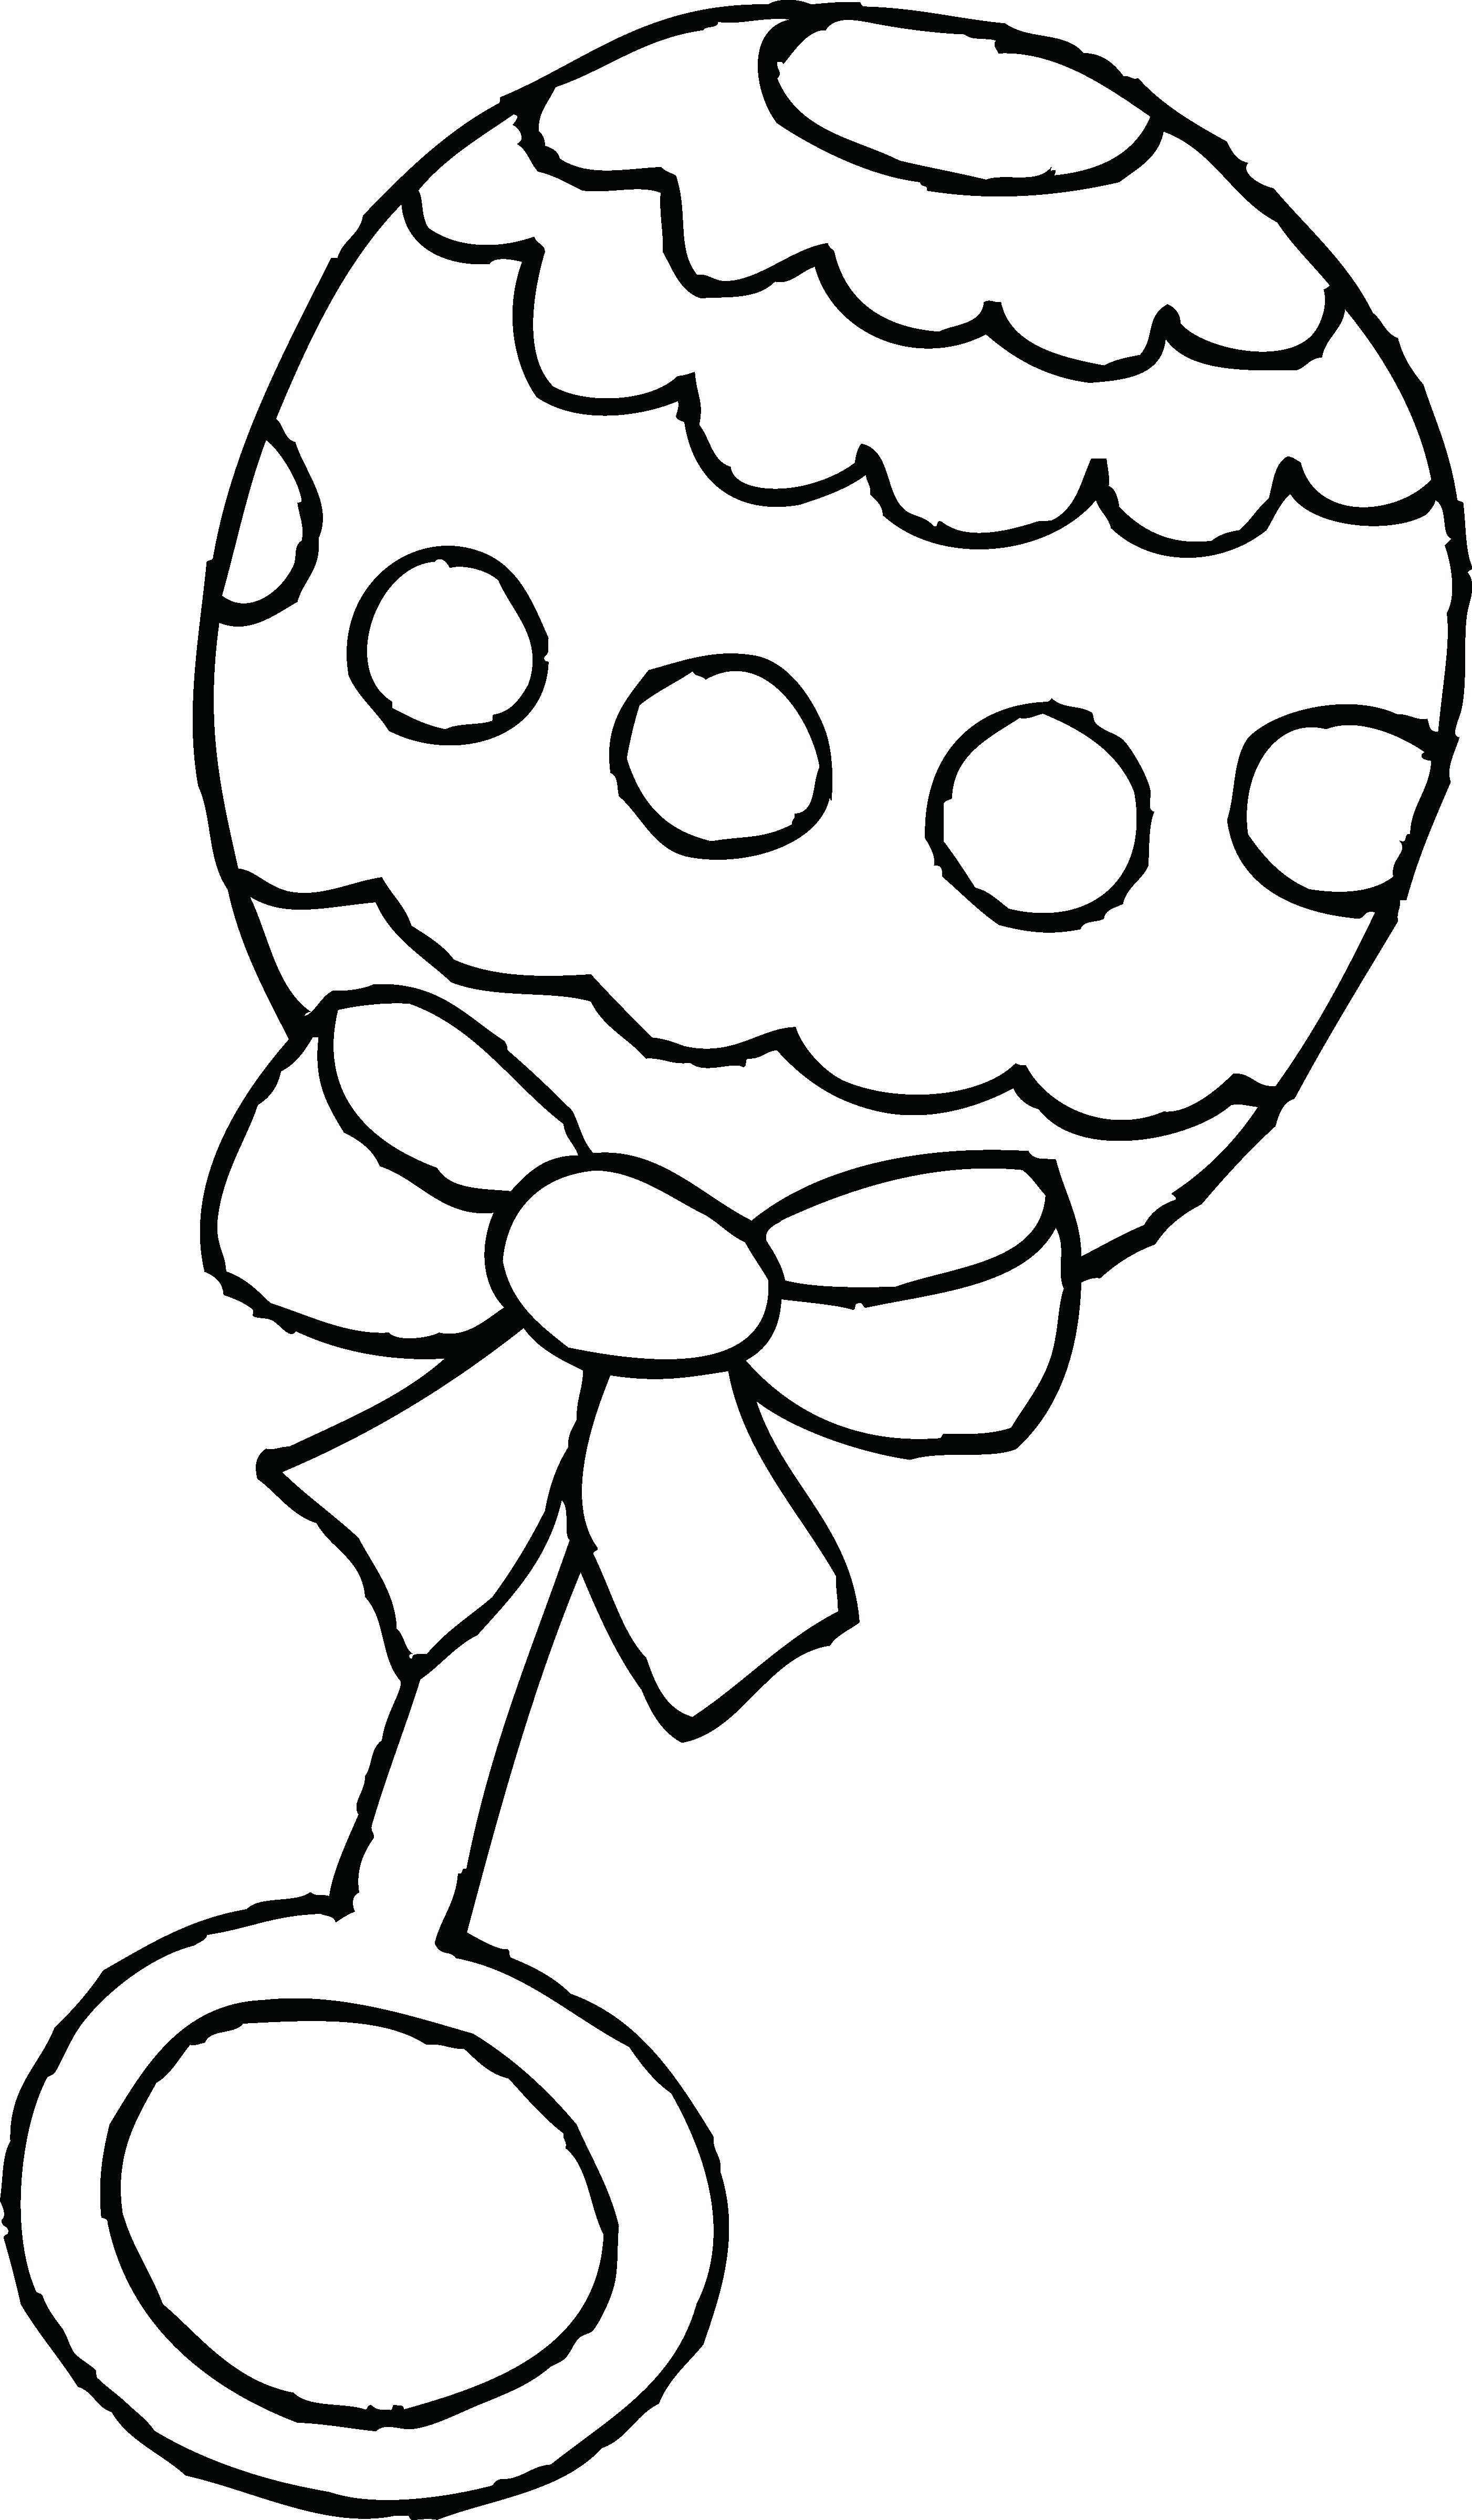 Coloring Pages: Baby Shower Coloring Print Free Printable For Kids - Free Printable Baby Shower Coloring Pages